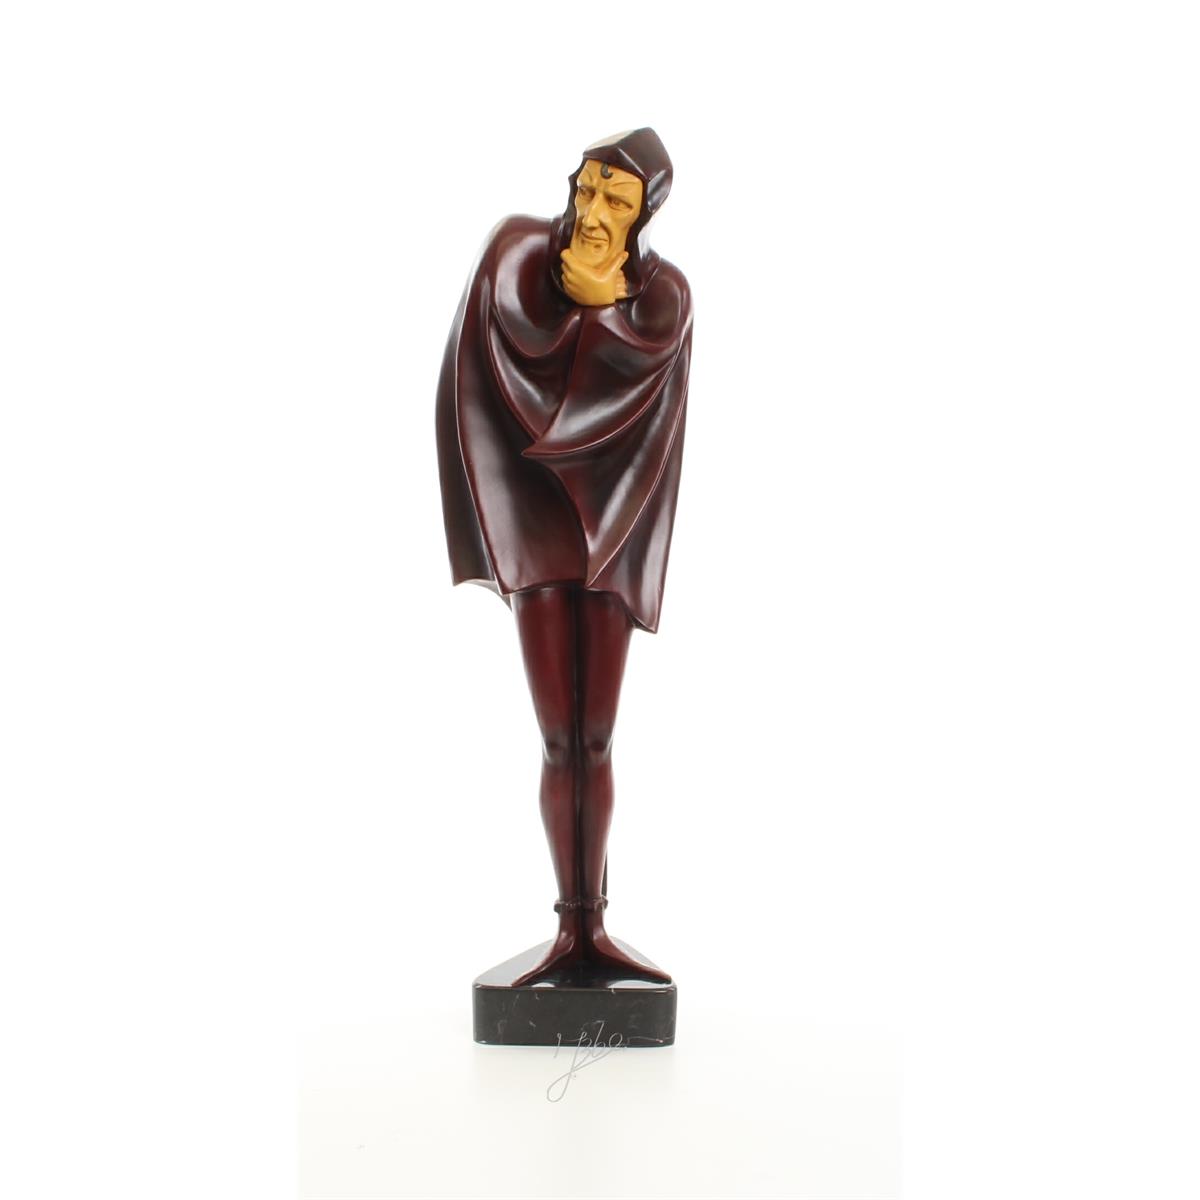 A WOOD MOUNTED BRONZE SCULPTURE OF MEPHISTOPHELES